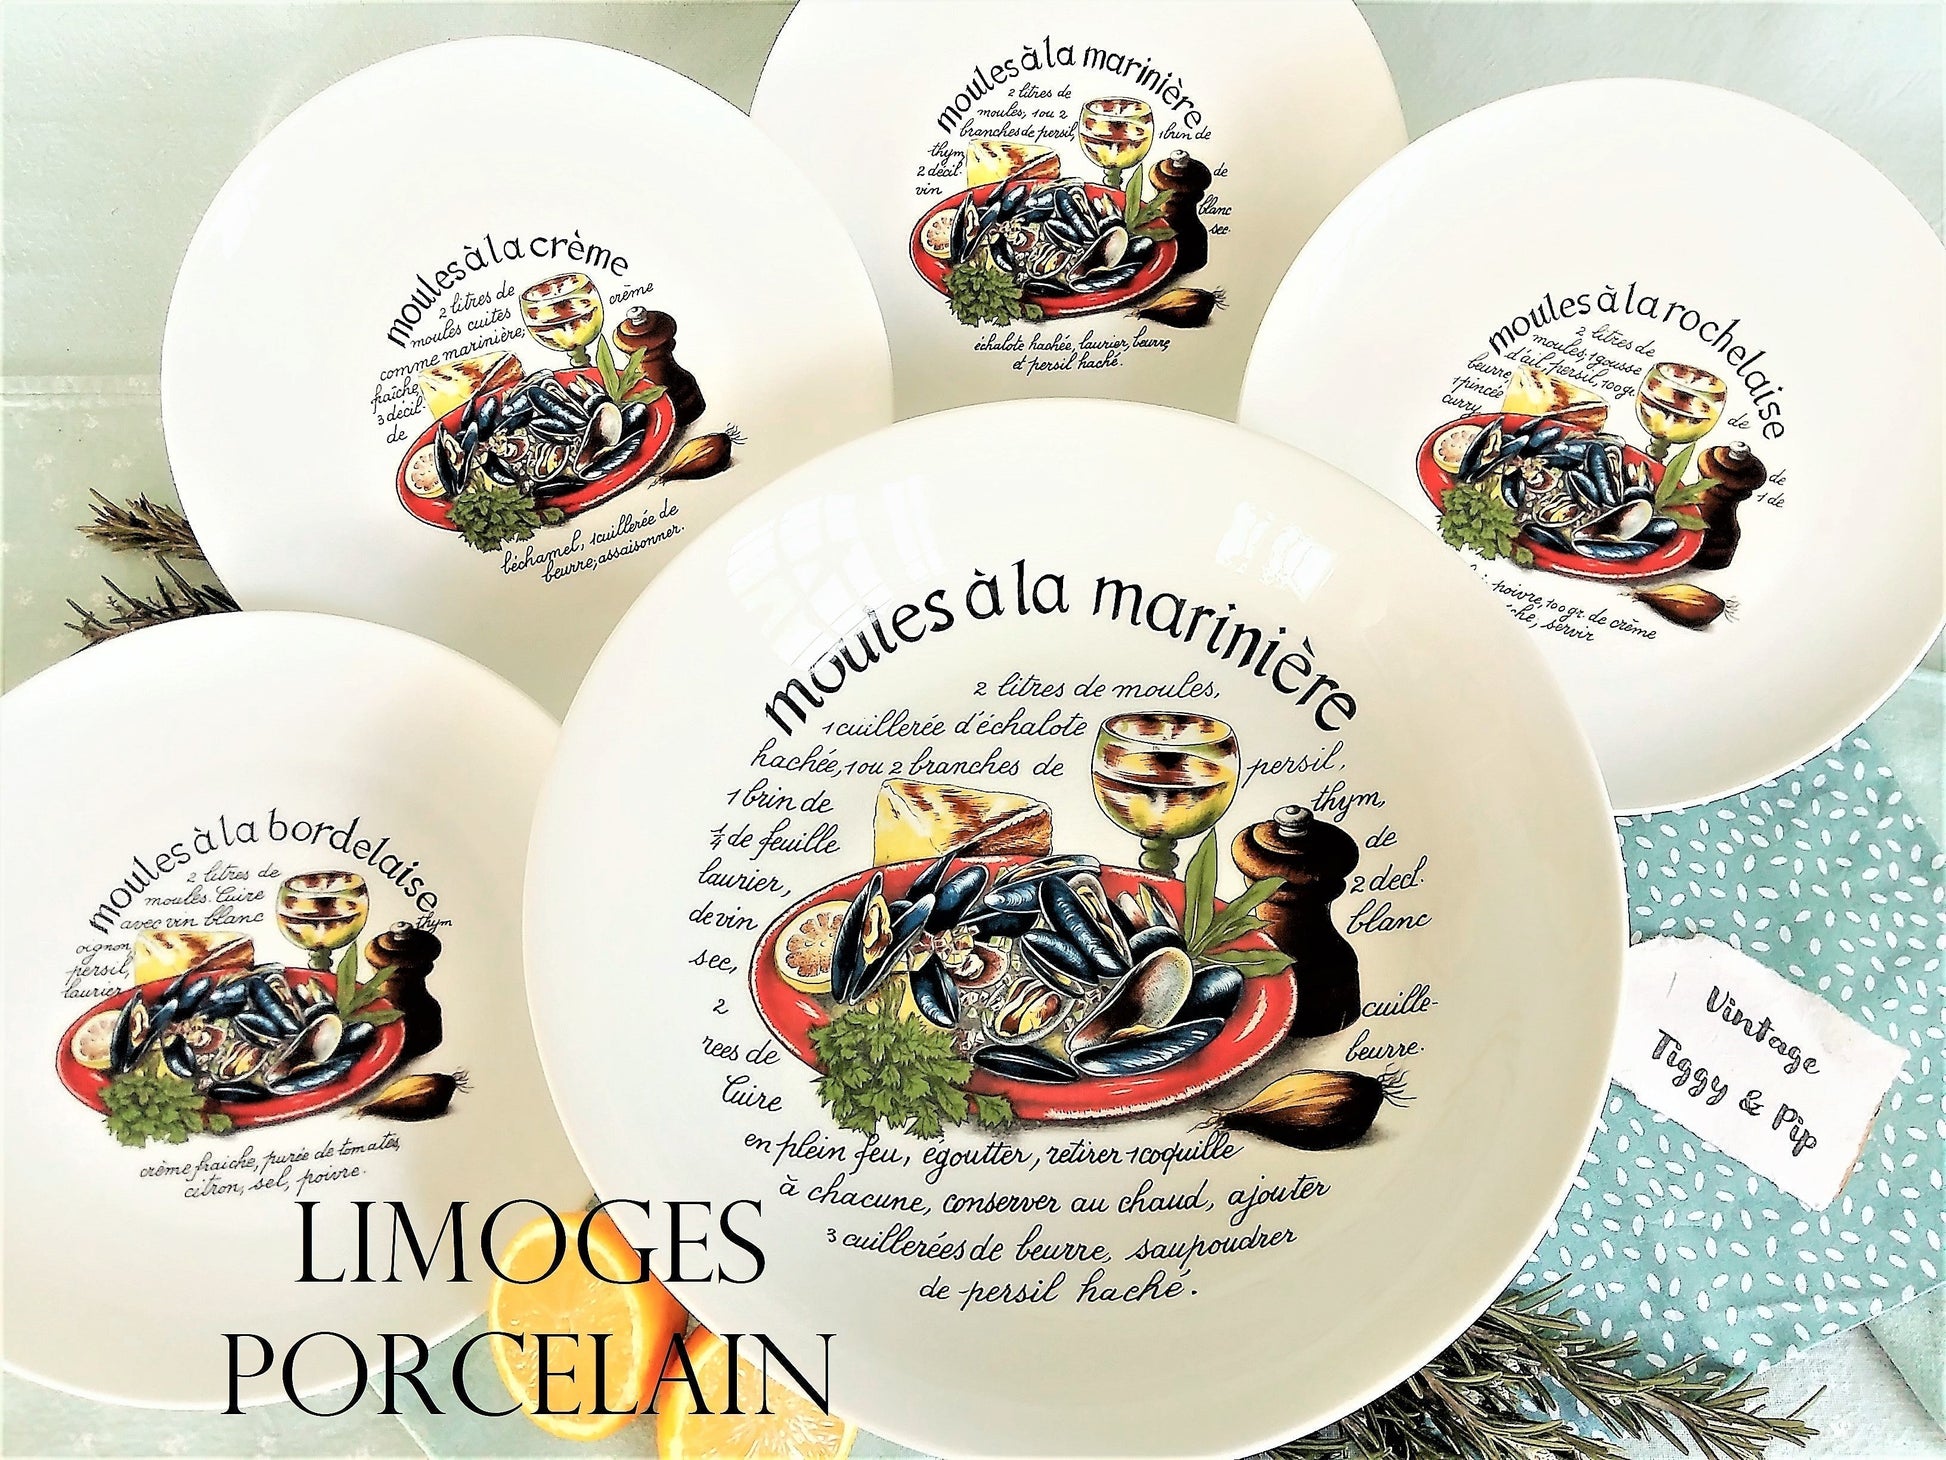 FOUR Limoges Plates for Moules with Large Serving Bowl. from Tiggy & Pip - €189.00! Shop now at Tiggy and Pip